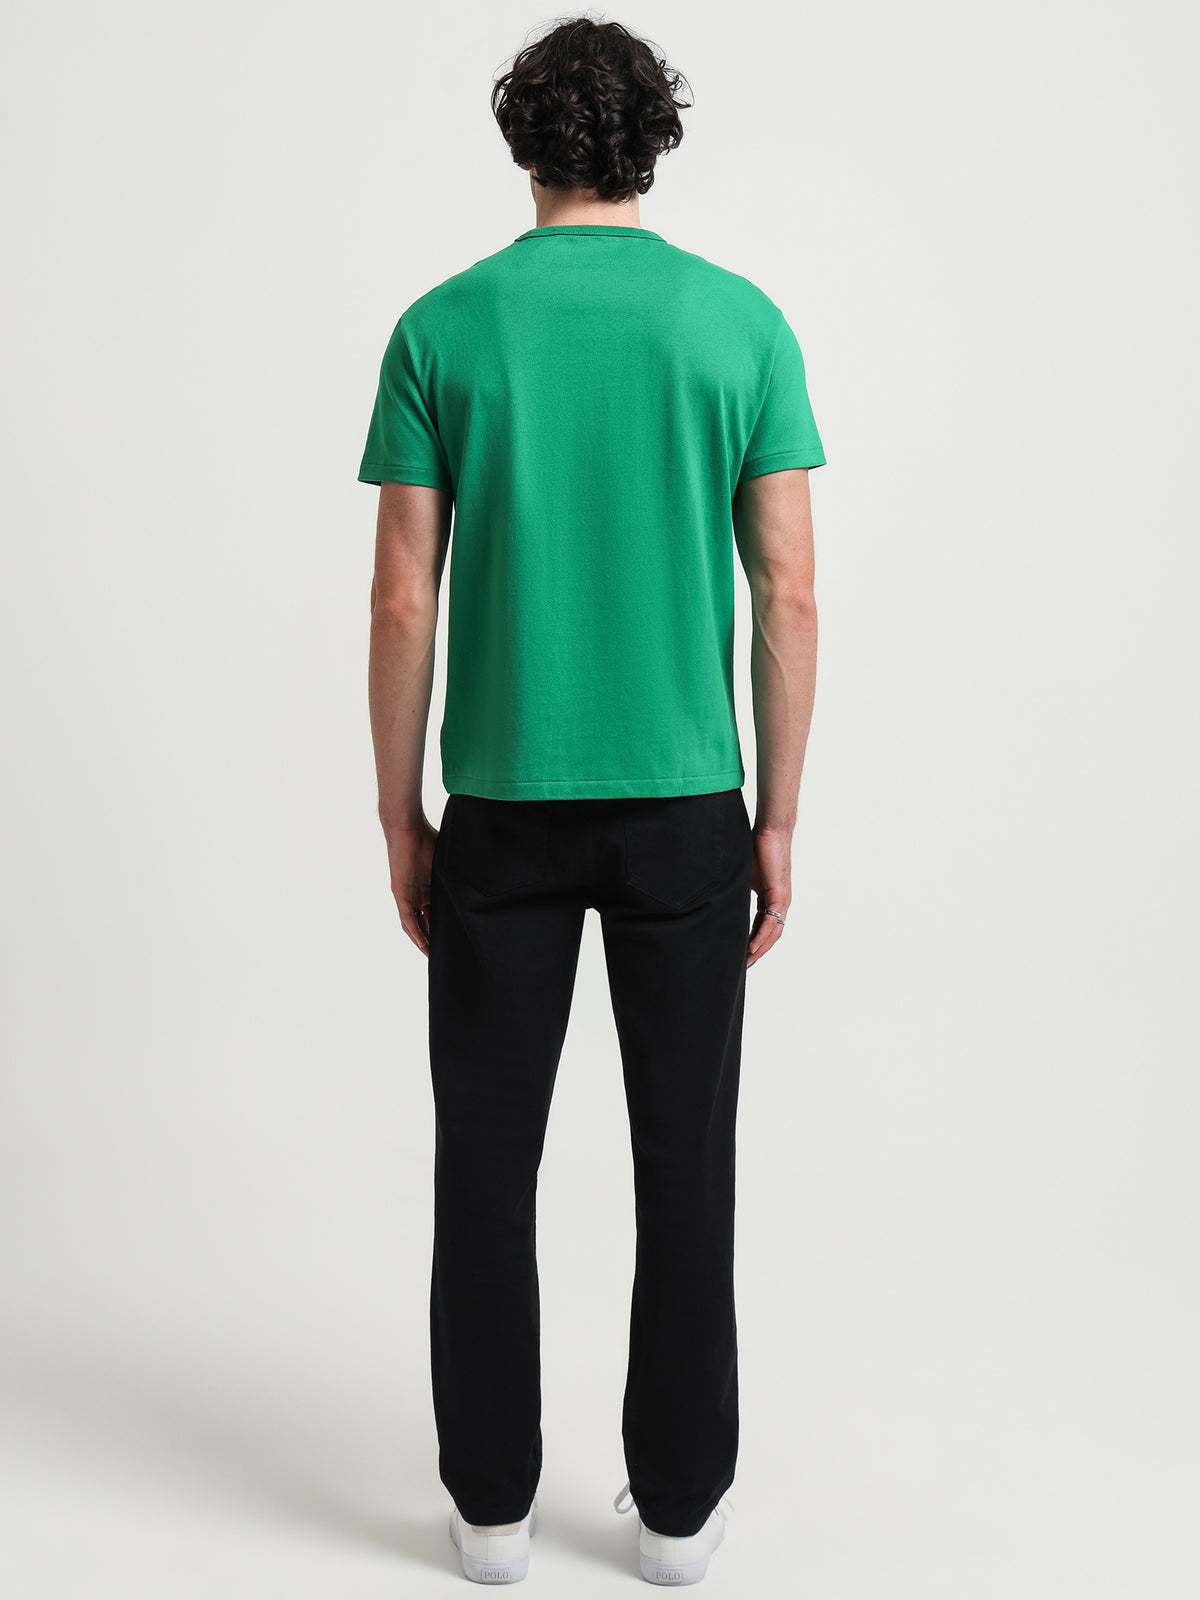 Classic Fit Jersey Crew Neck T-Shirt in Green